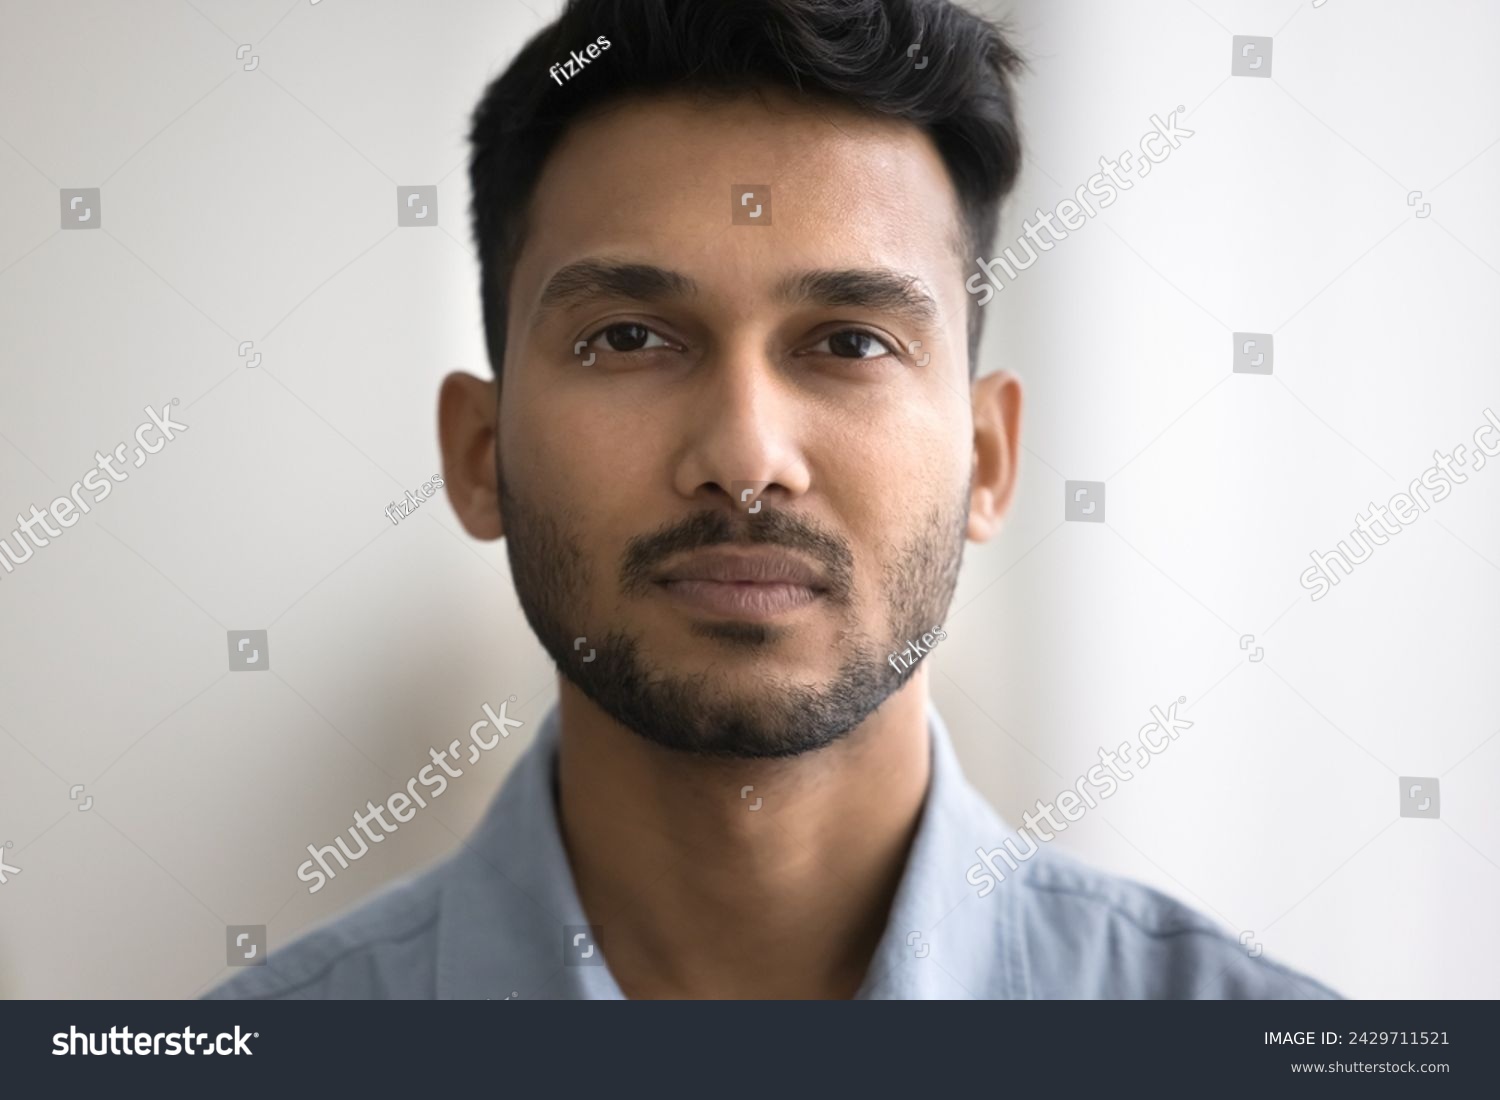 Close up of unsmiling Indian bearded guy standing indoor staring at camera. Man having attractive appearance, looks confident and serious. Millennial generation person, businessman head shot portrait #2429711521